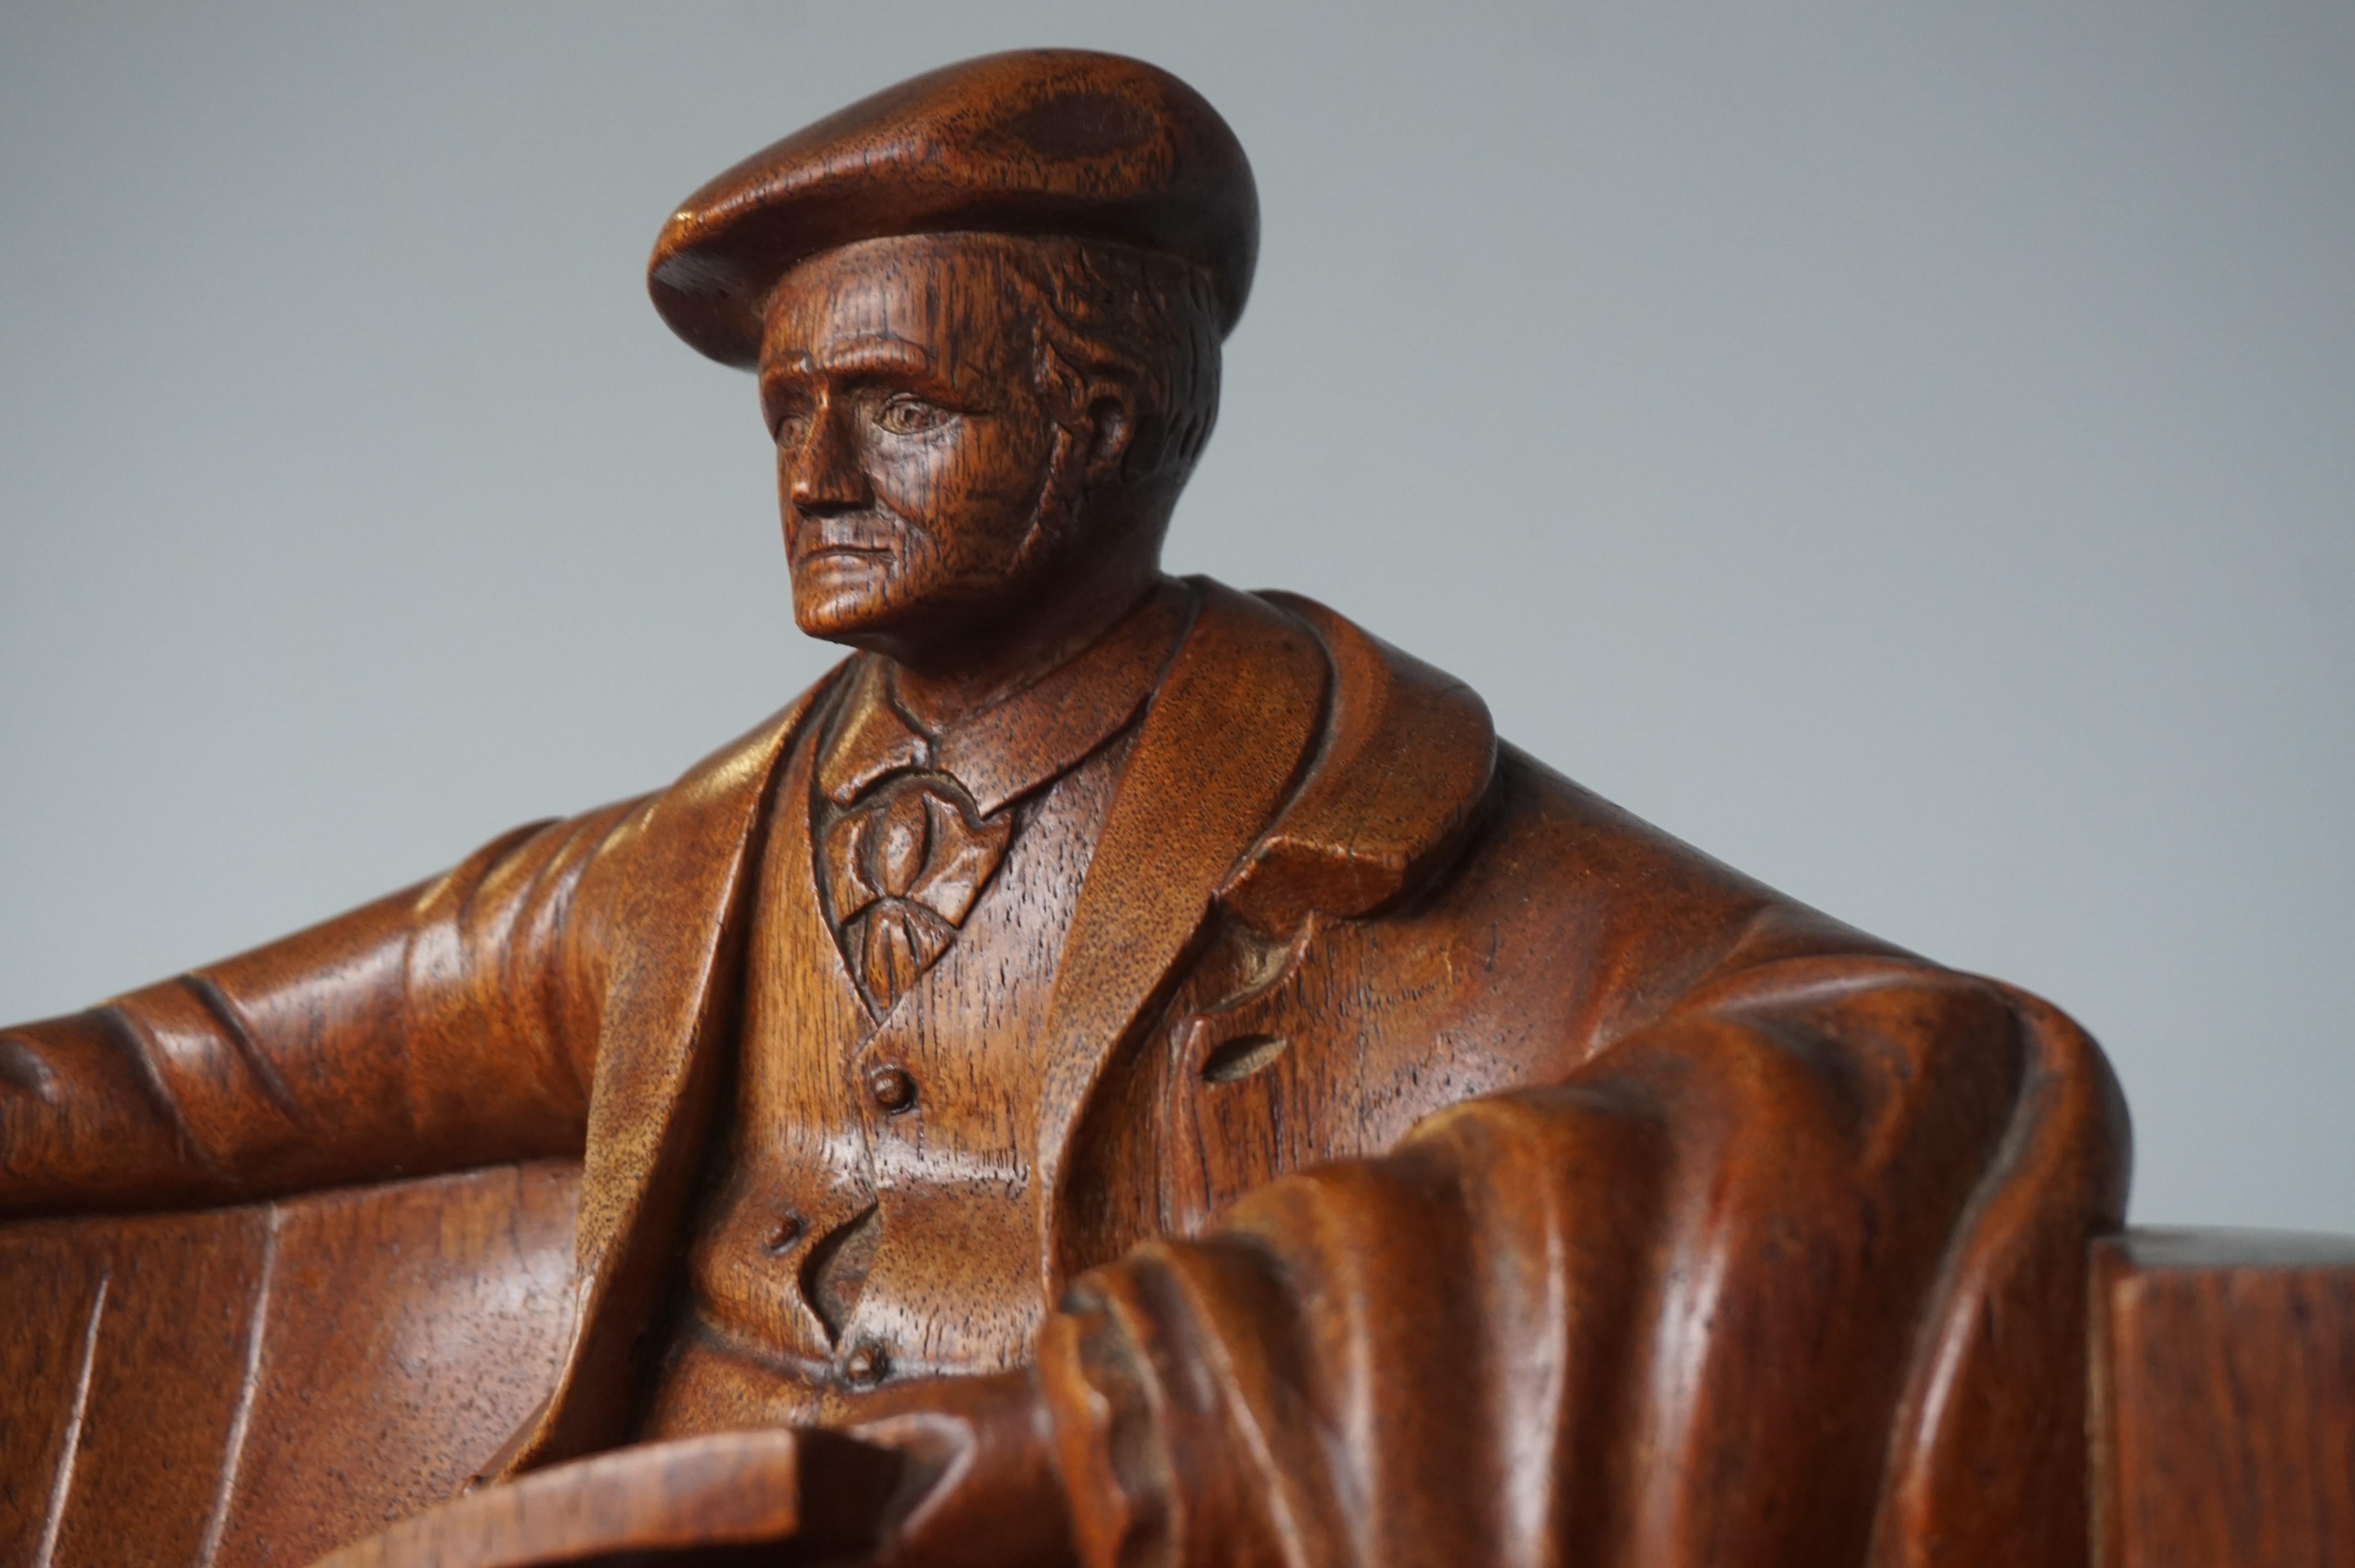 20th Century Unique & Stylish Sculpture of a Seated Scholar / Academic Made of Solid Teakwood